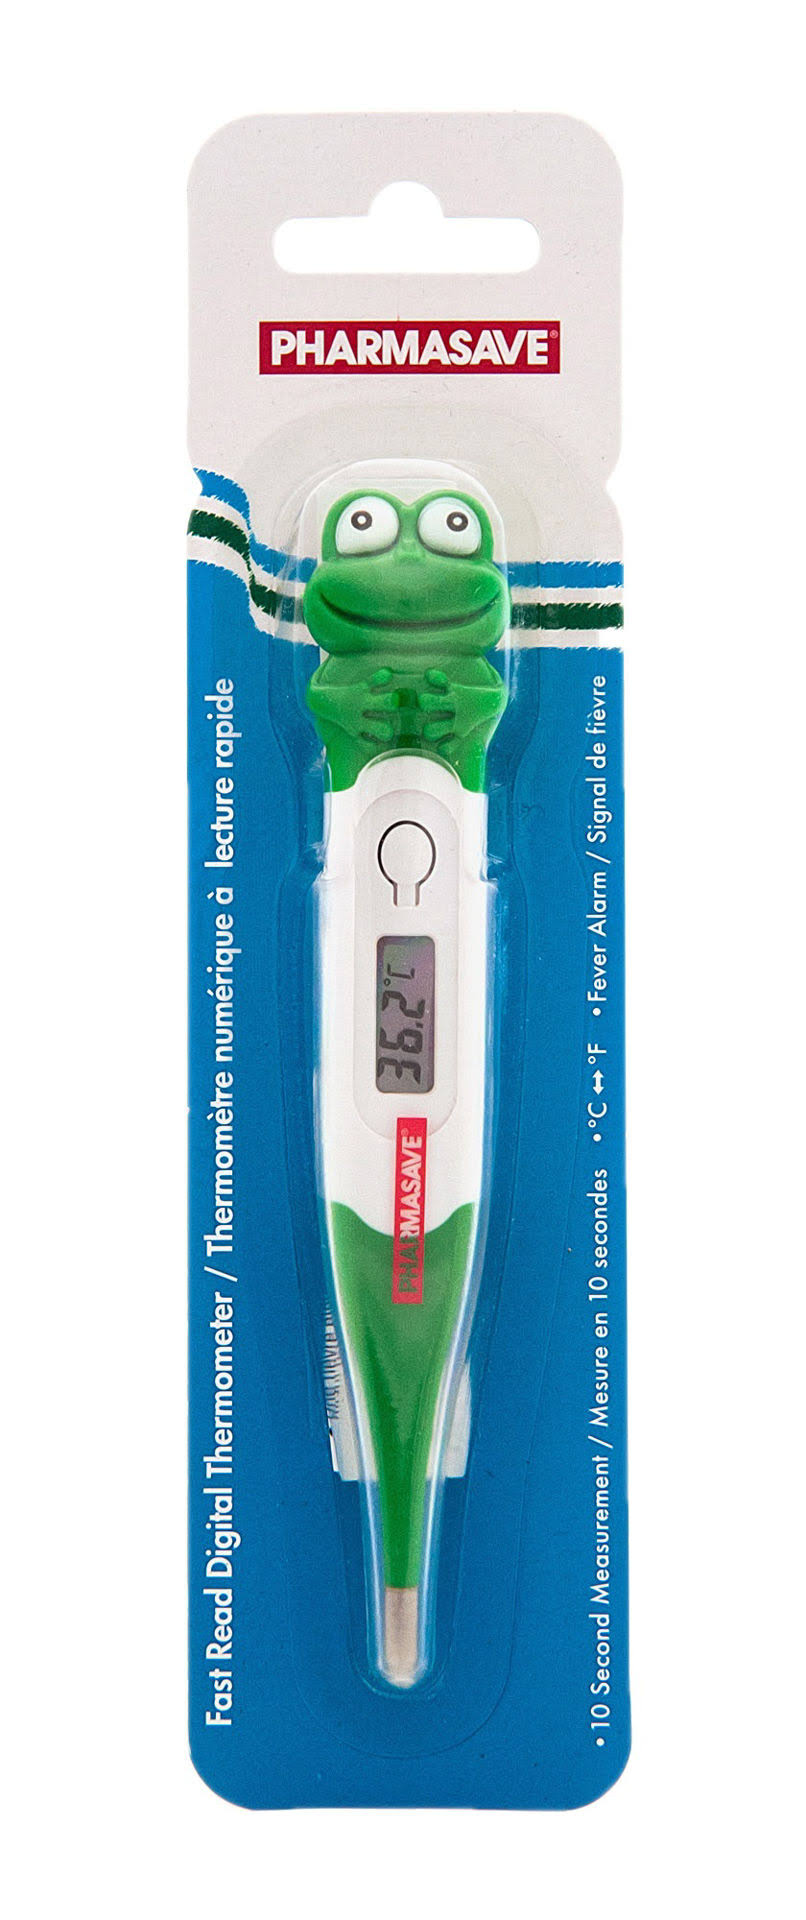 PHARMASAVE FAST READ DIGITAL THERMOMETER 10 SECOND - CHILDRENS CHARACTER